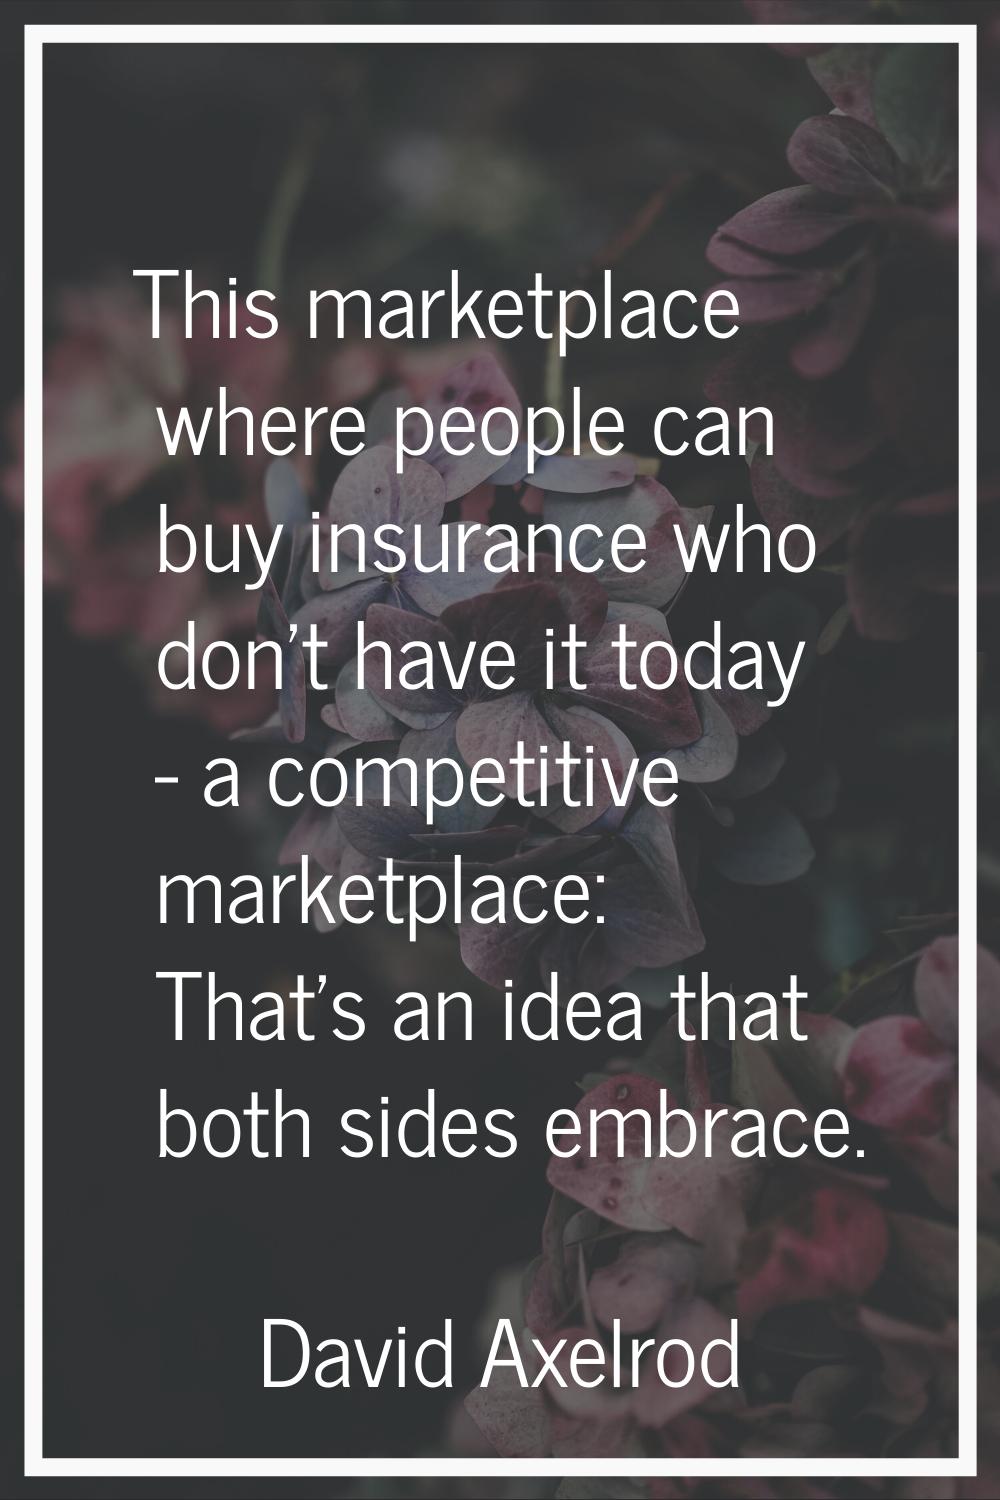 This marketplace where people can buy insurance who don't have it today - a competitive marketplace